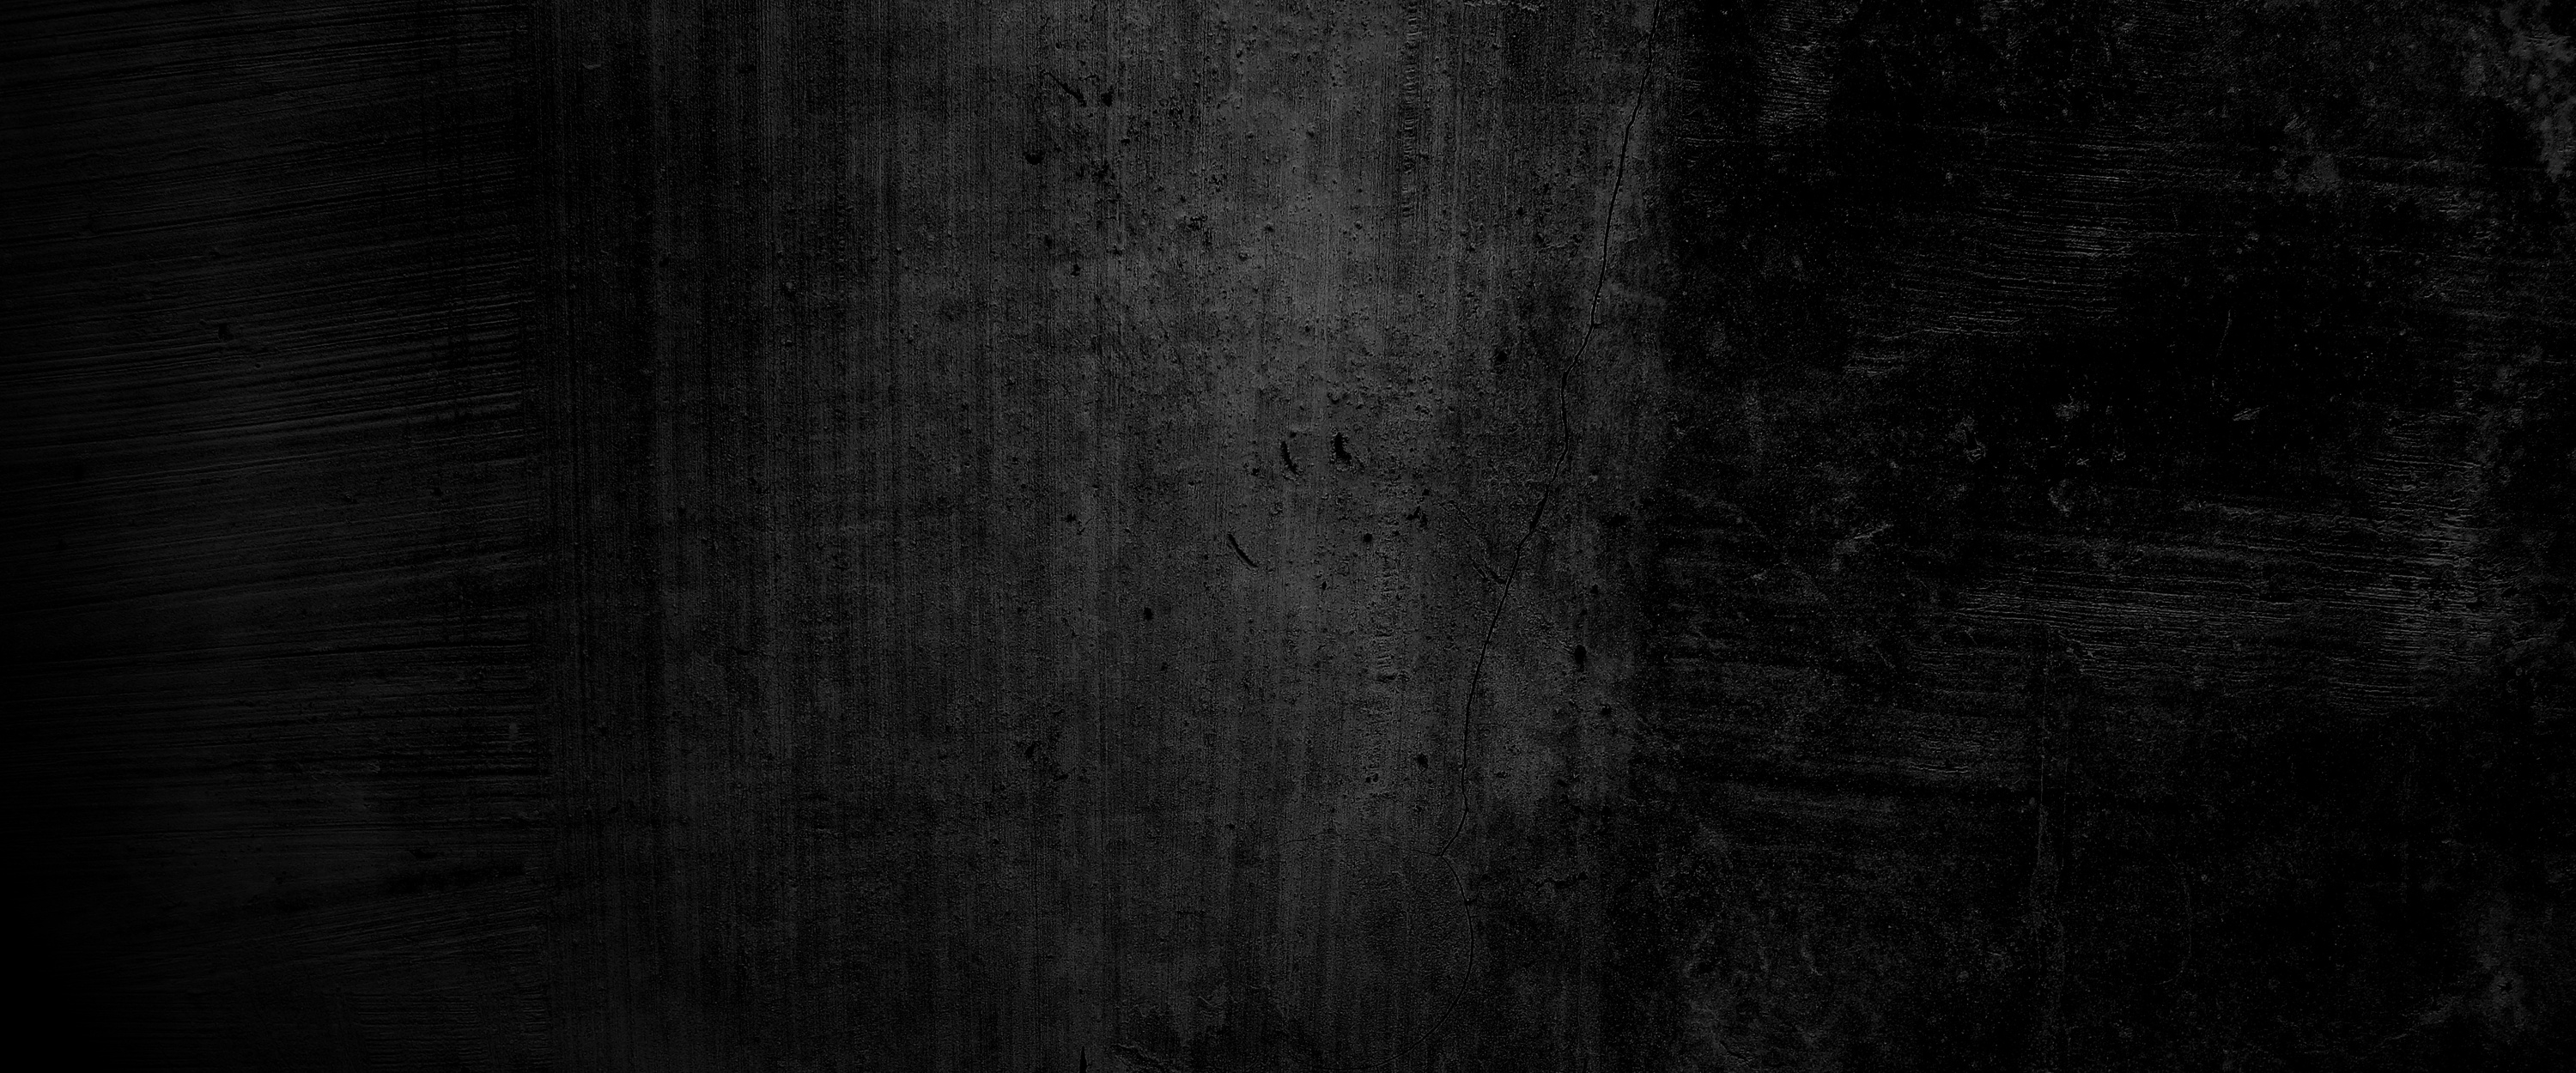 Dark Scary Wall Background. Horror Cement Background